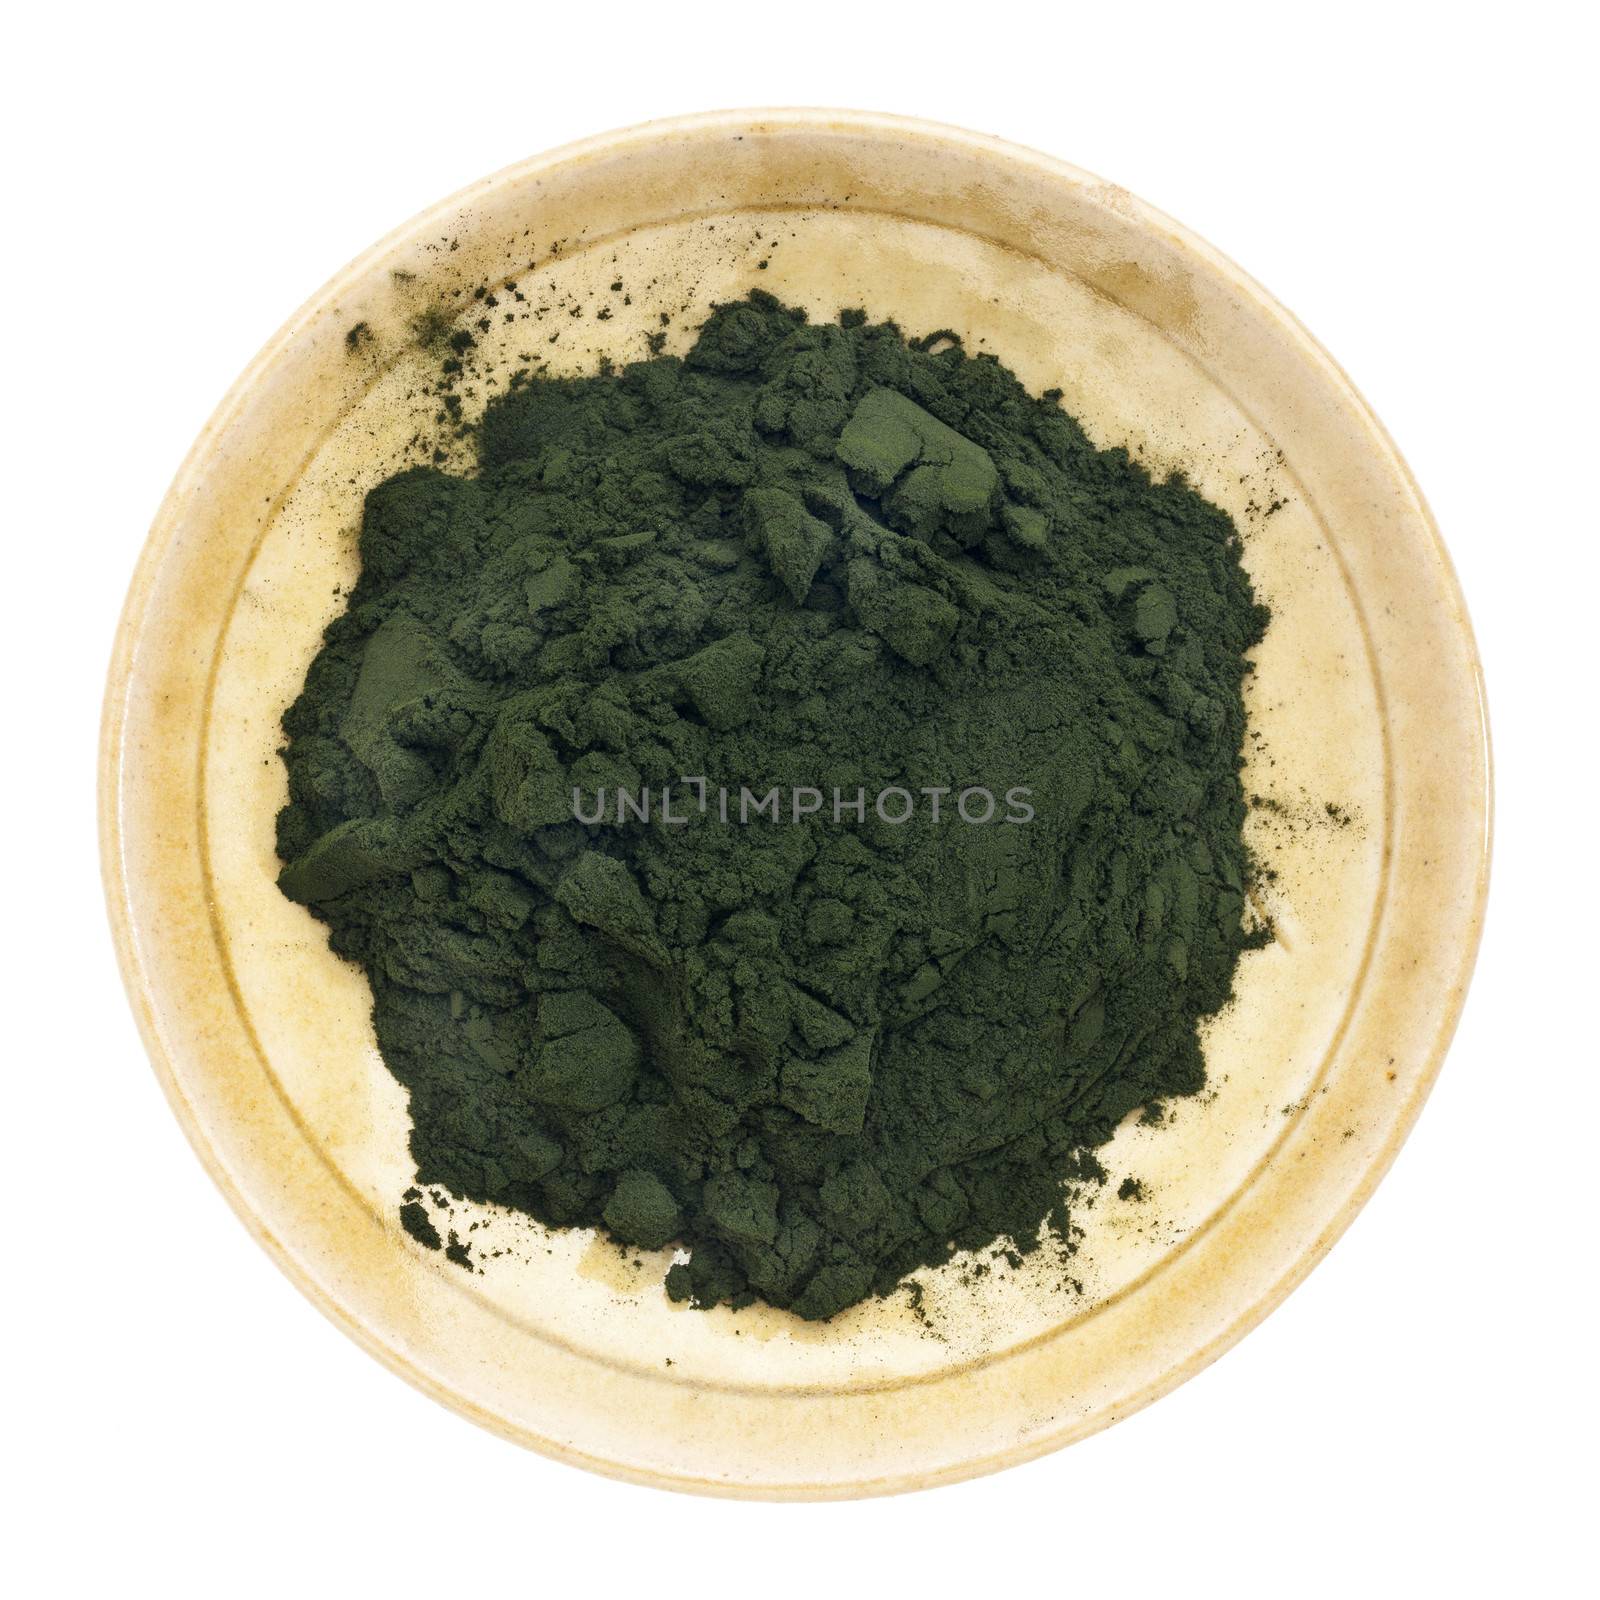 Nutrient-rich organic chlorella powder on a small ceramic bowl, isolated on white, top view